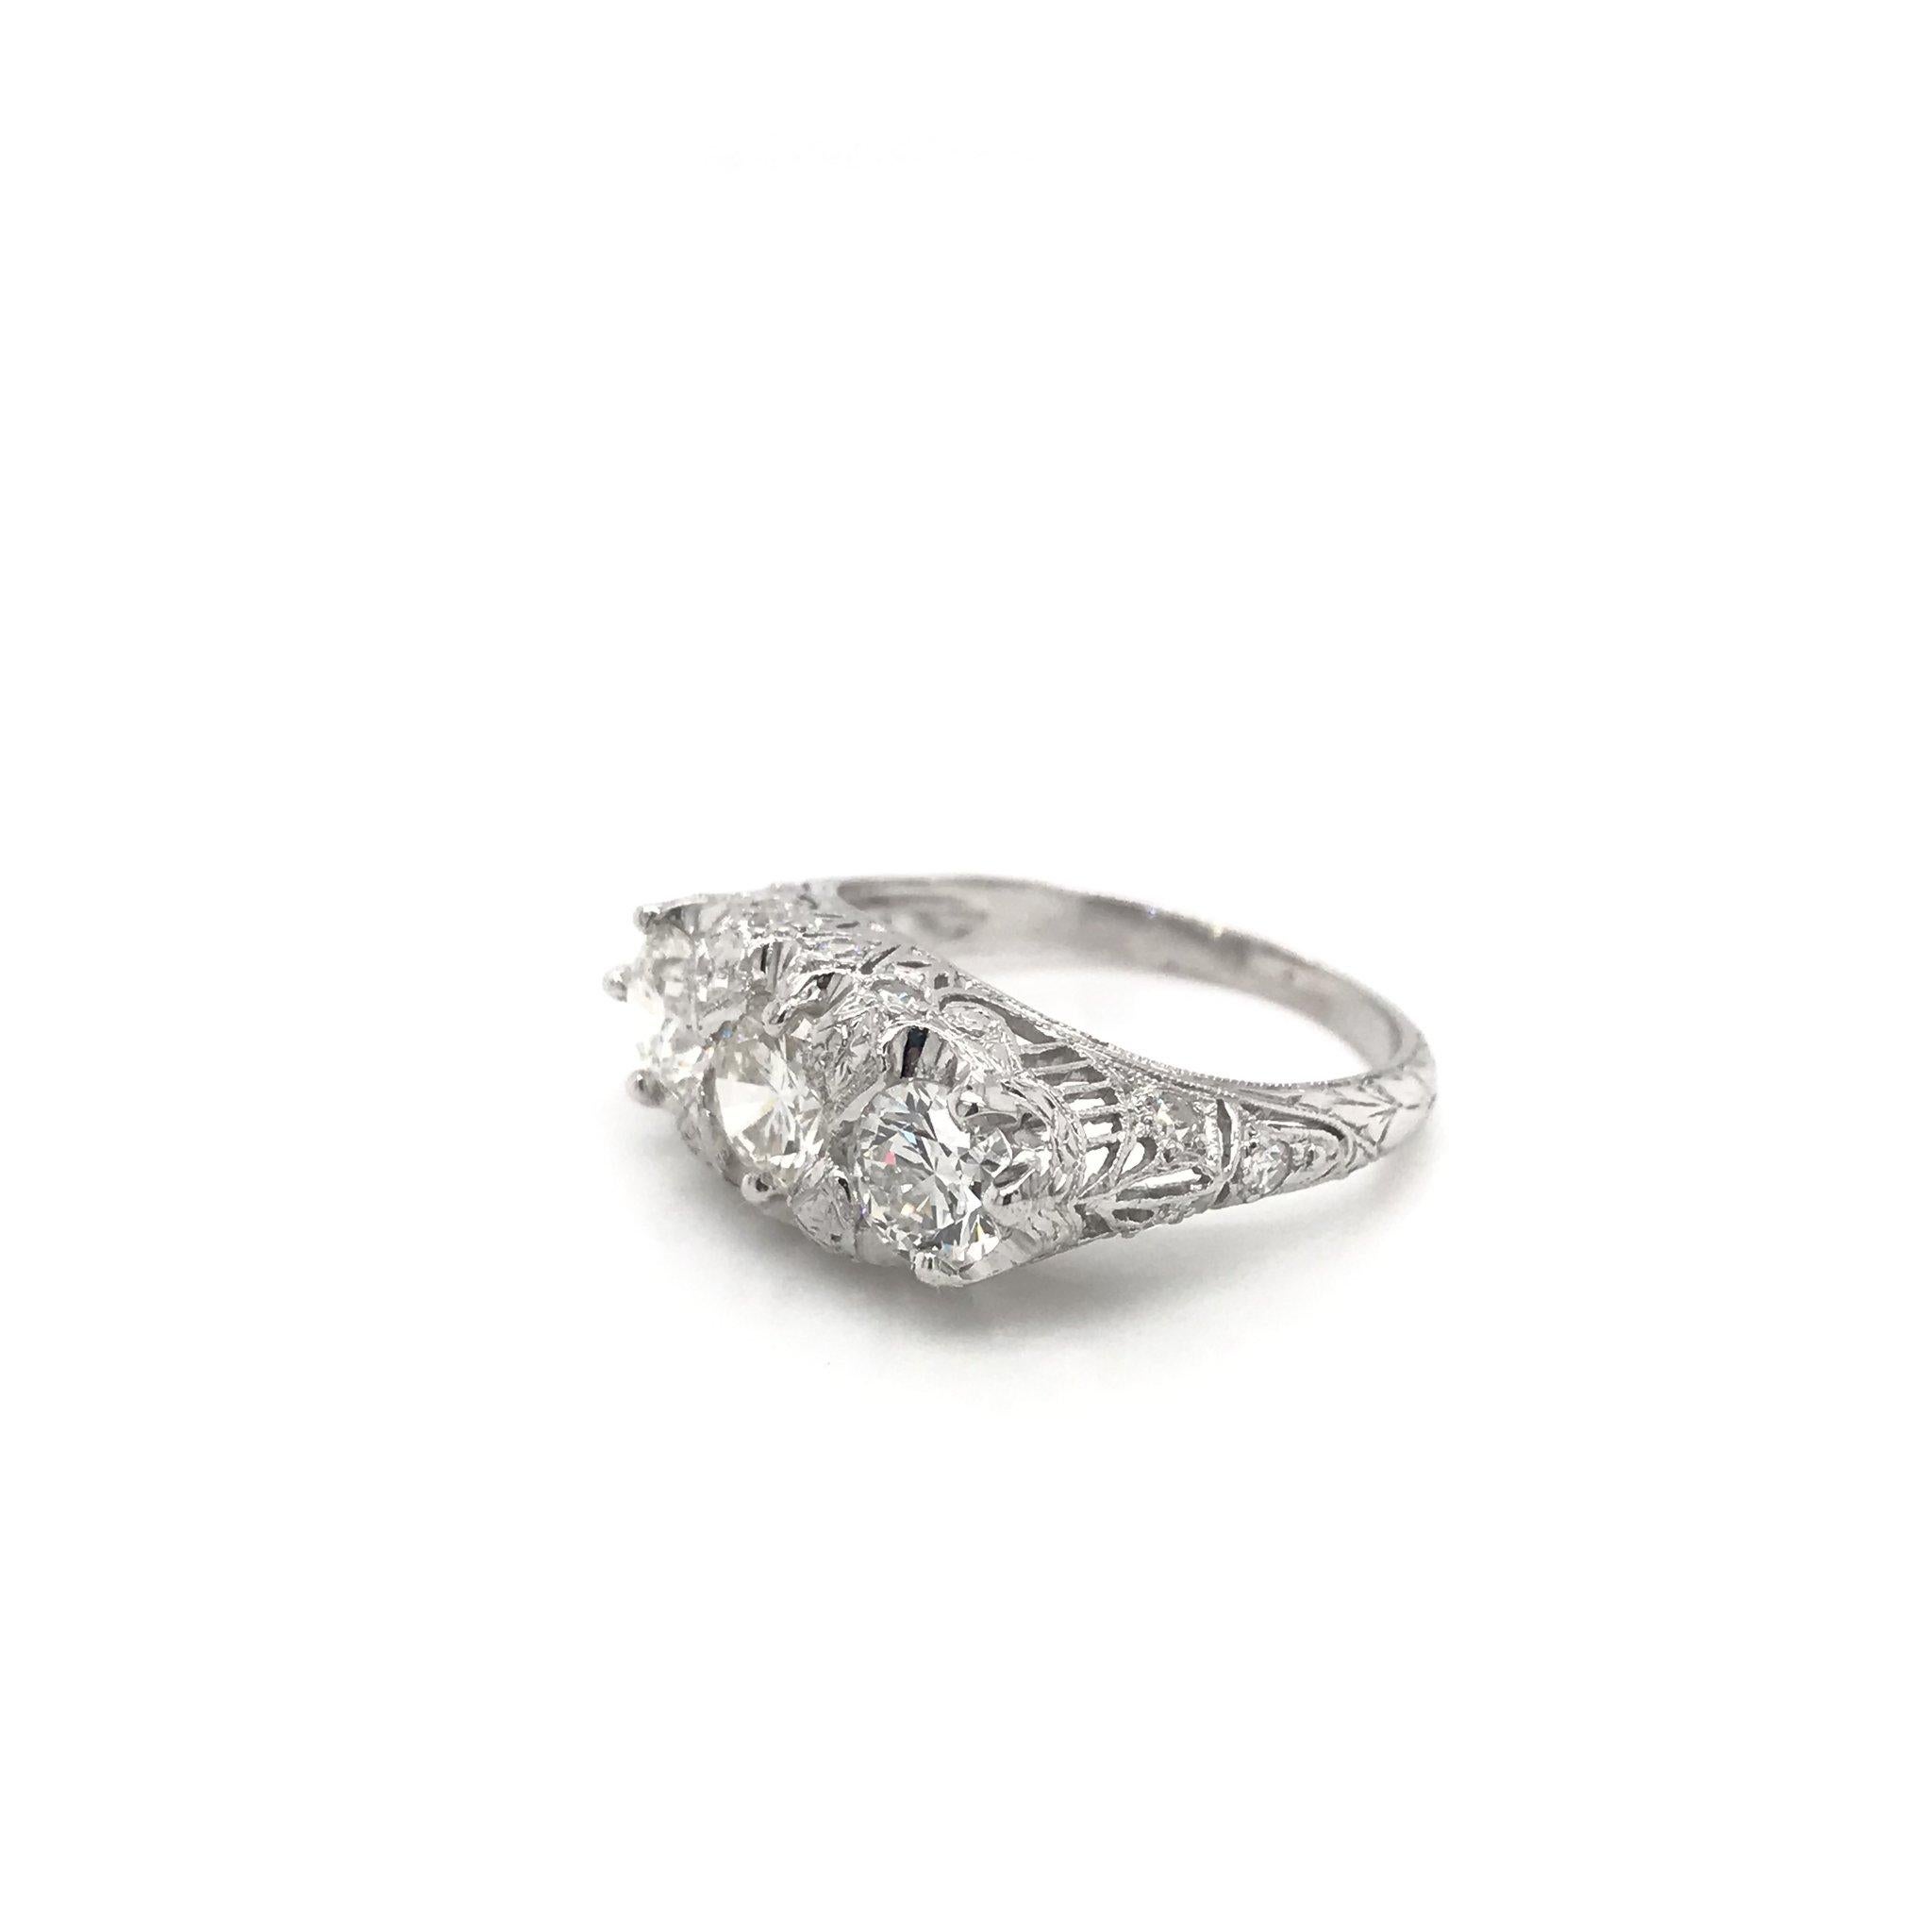 This antique piece was skillfully handcrafted sometime during the Edwardian design period ( 1900-1915 ). The setting features three central diamonds all weighing approximately 0.50 carats each, grading F in color, VS in clarity. The platinum